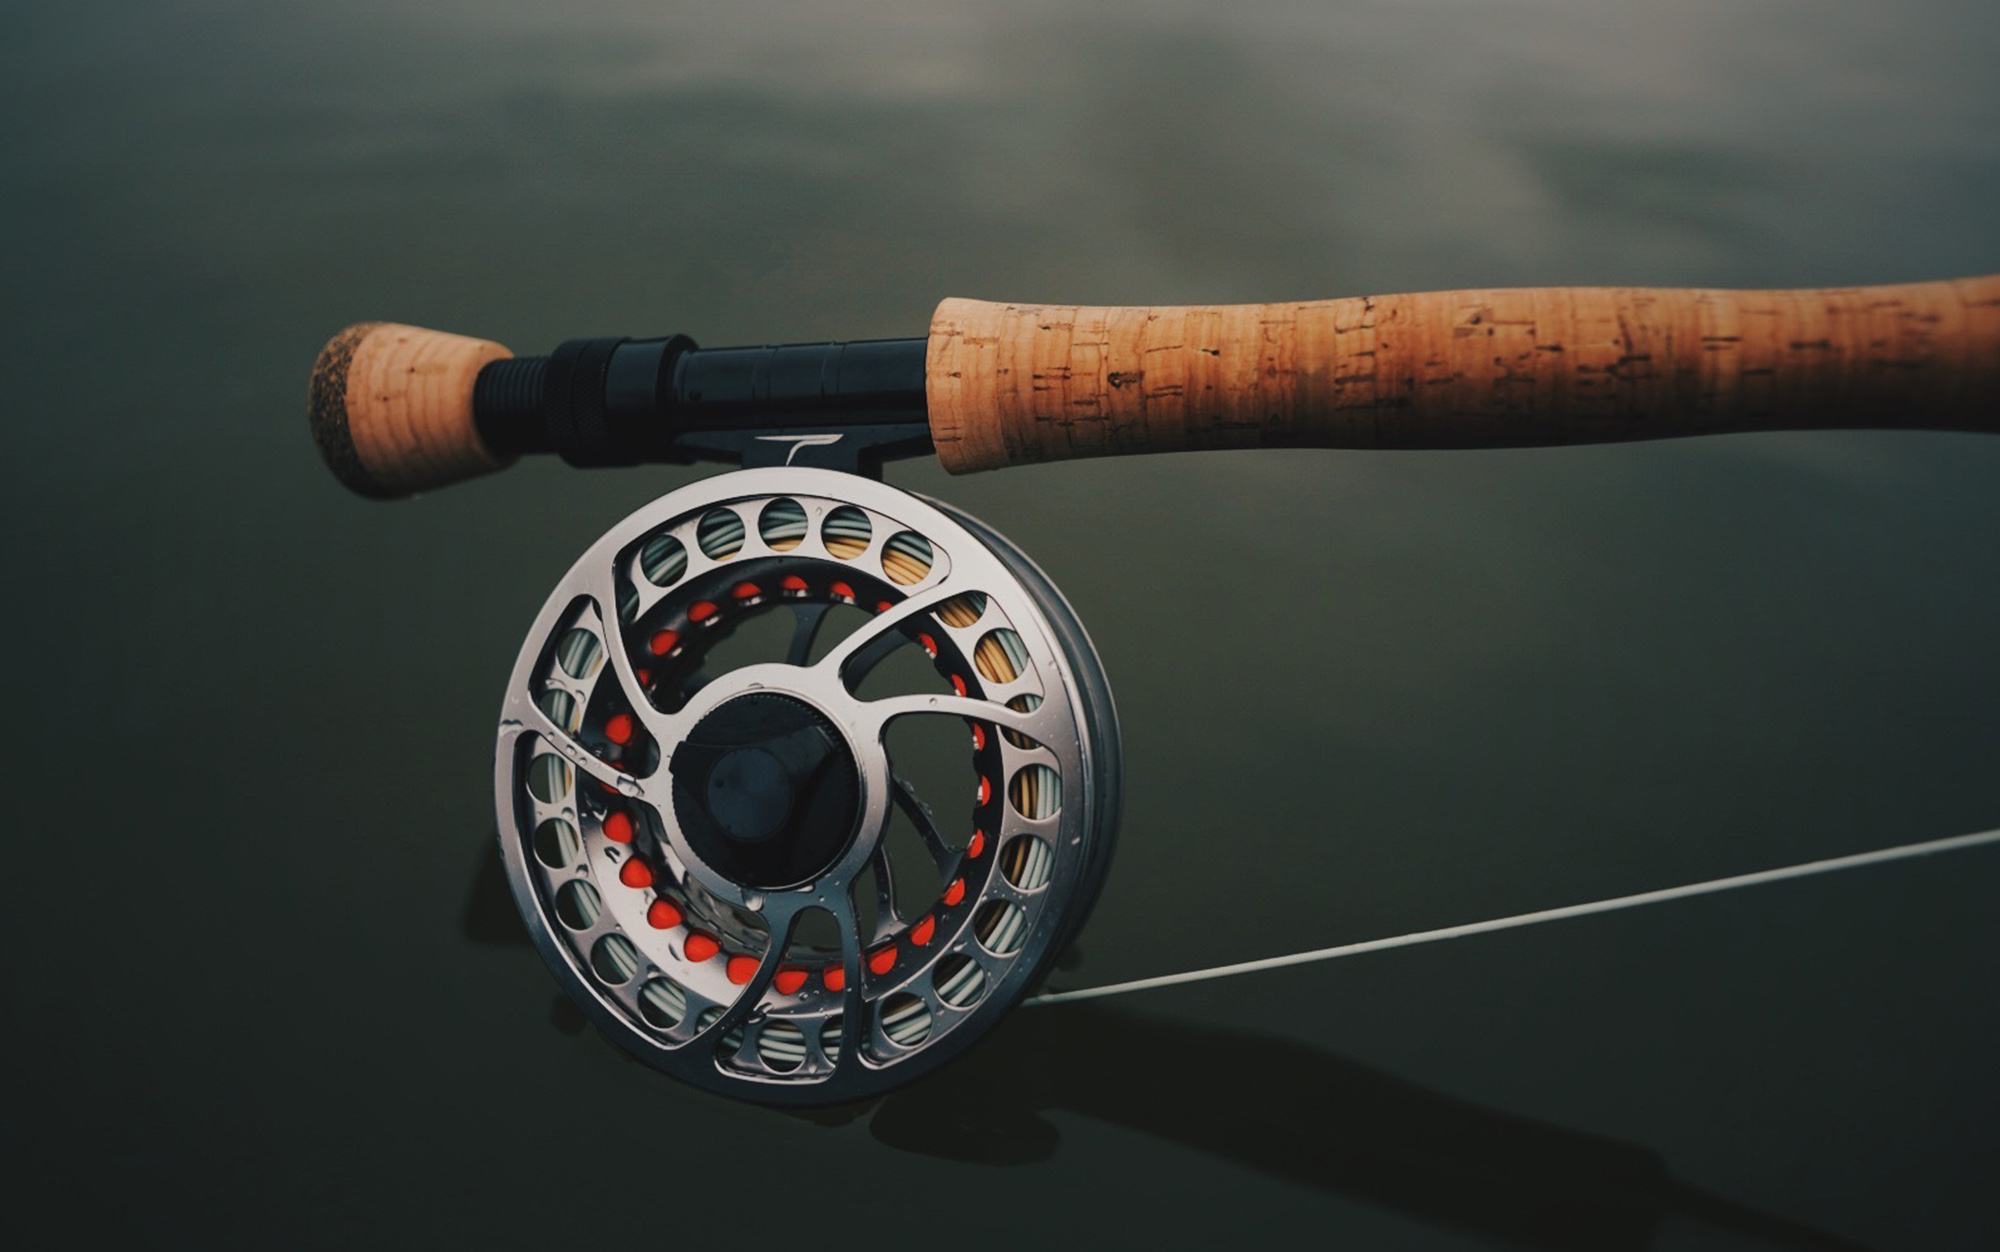 Best 10 wt Saltwater Fly Reel to match an Xi3 ? - Page 2 - Fly